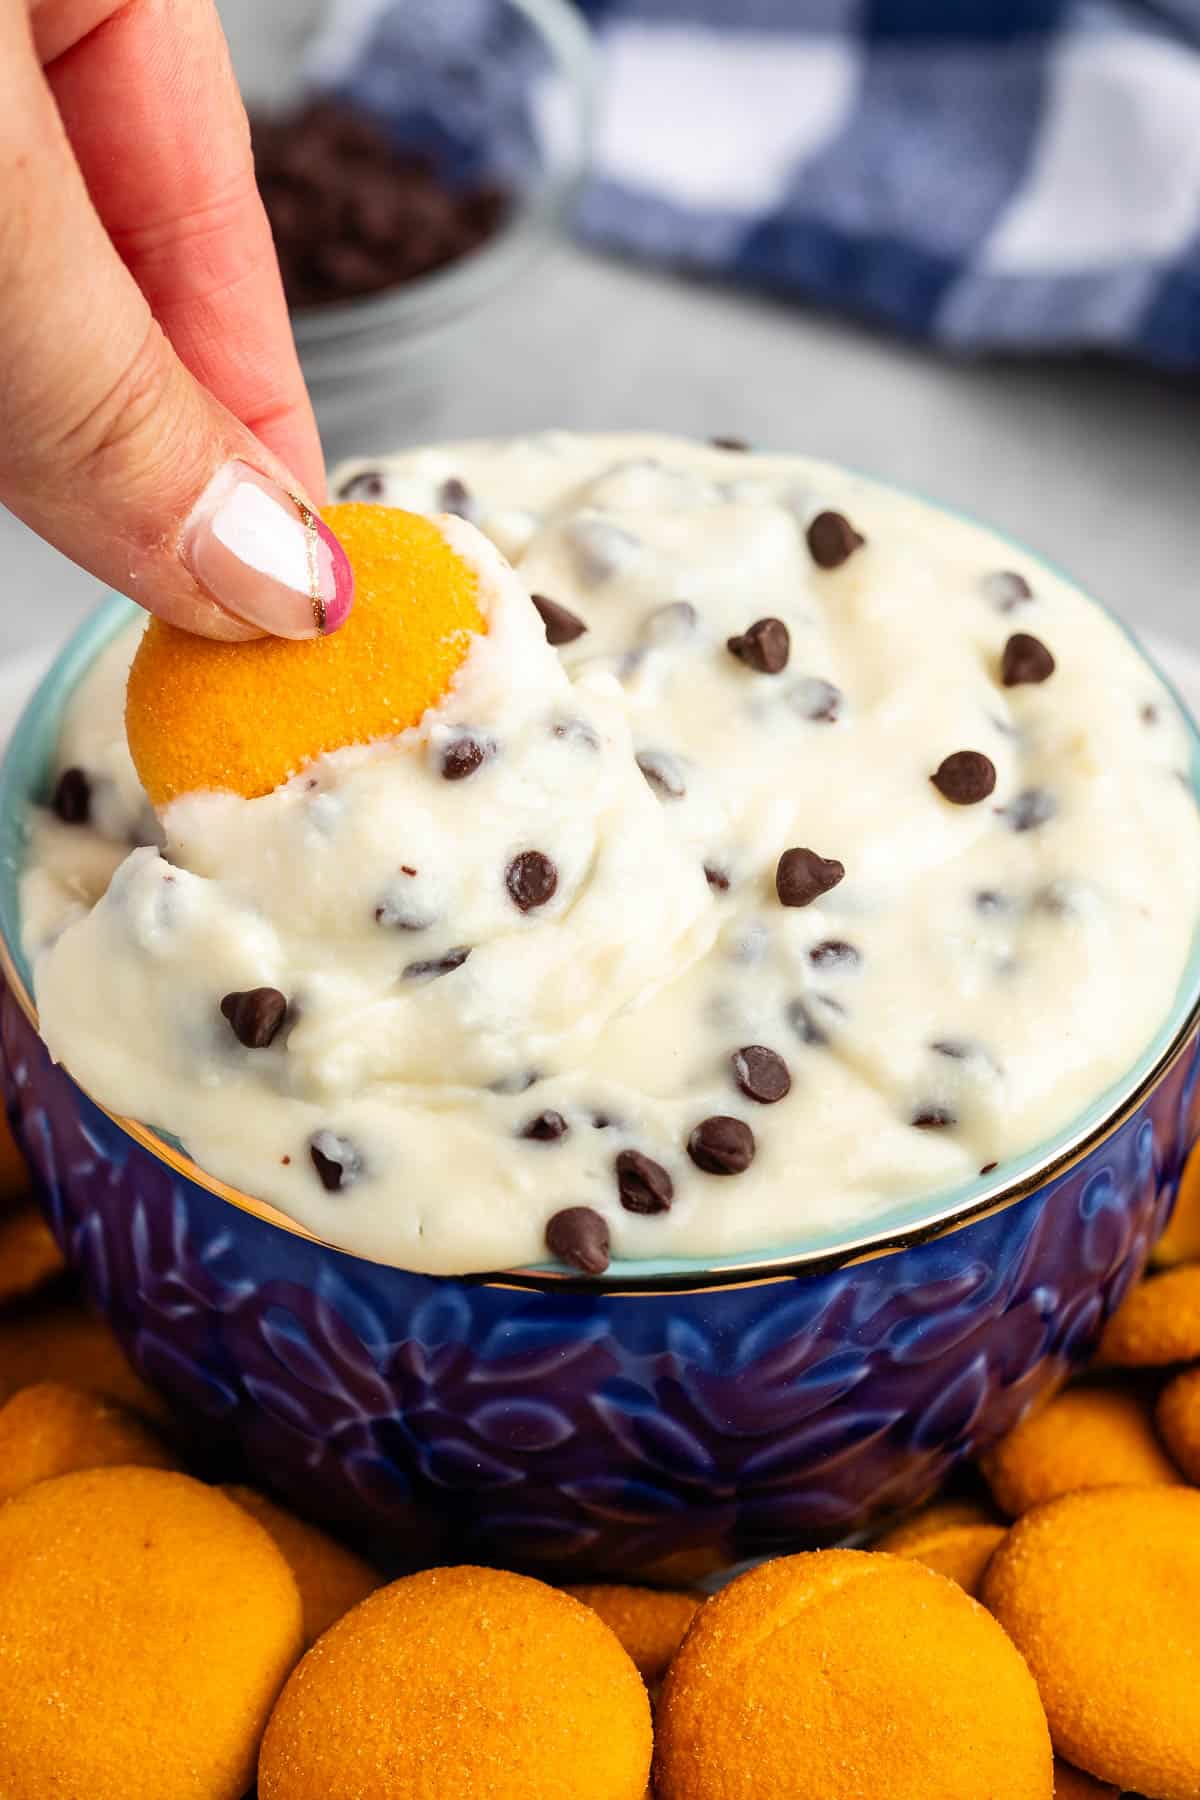 cannoli dip in a blue bowl with orange cookie wafers next to the bowl and hand dipping cookie into the bowl.